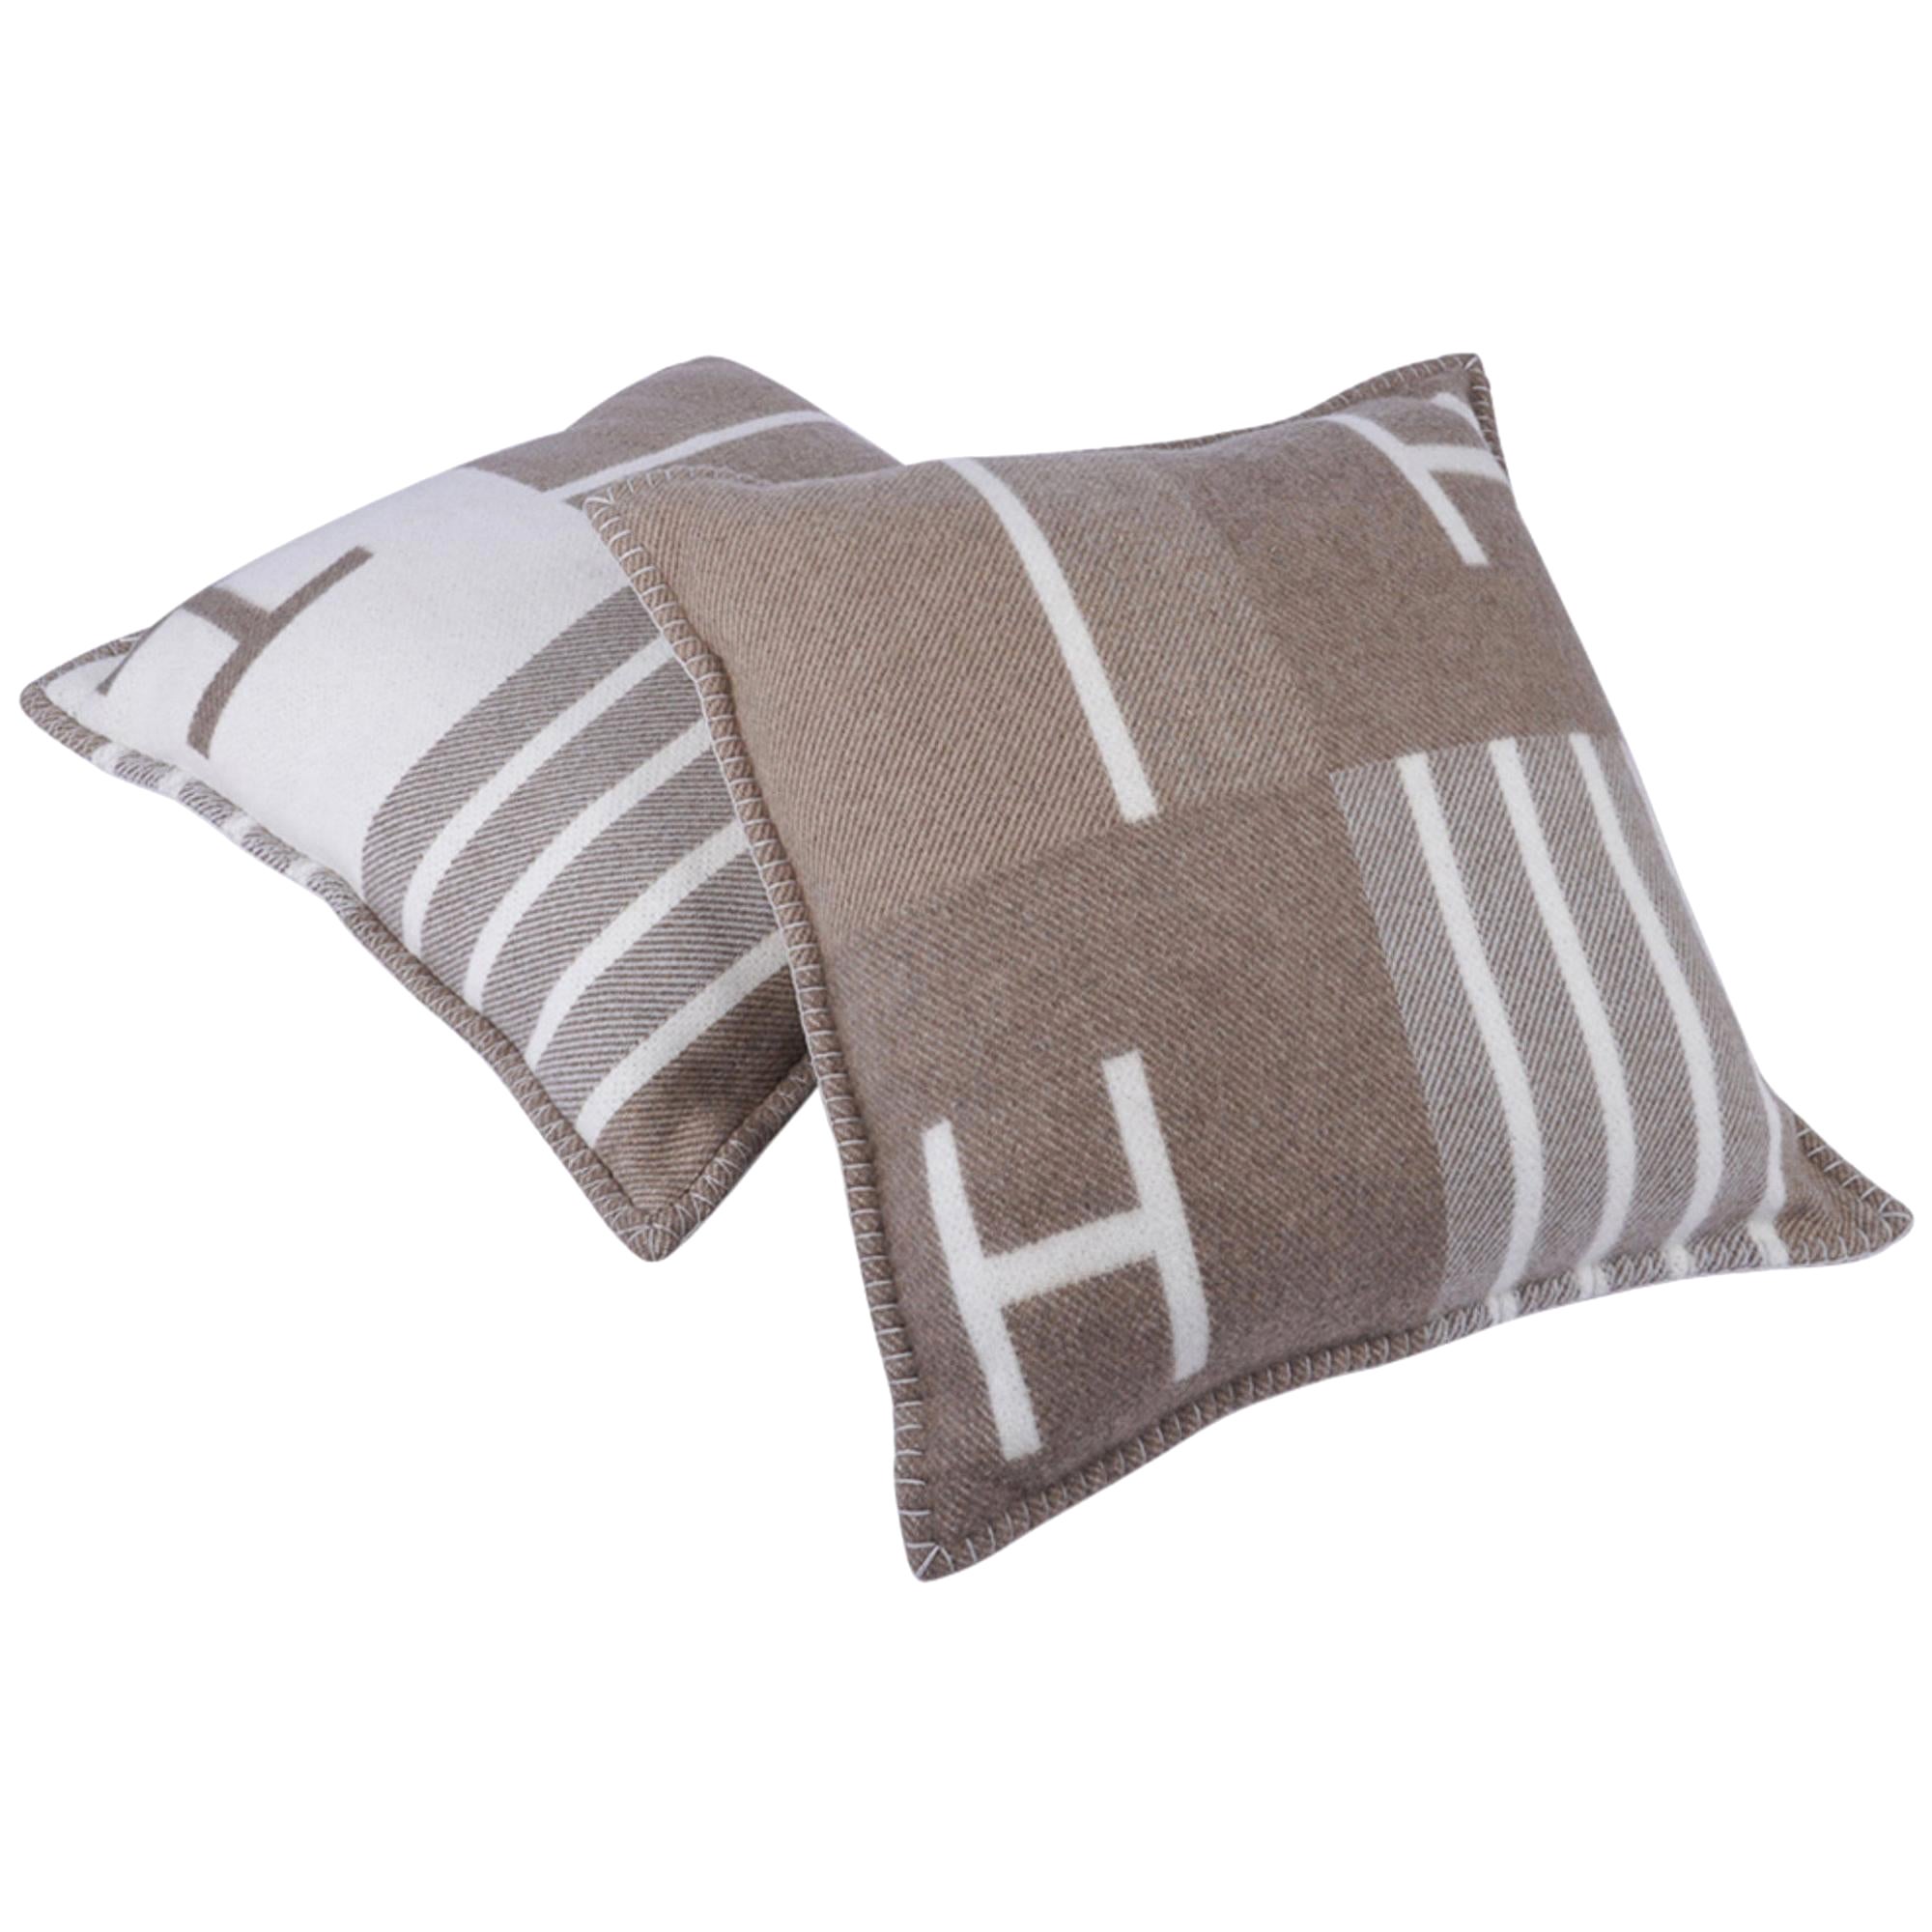 Hermes Avalon Vibration Pillow Naturel Set of Two Limited Edition